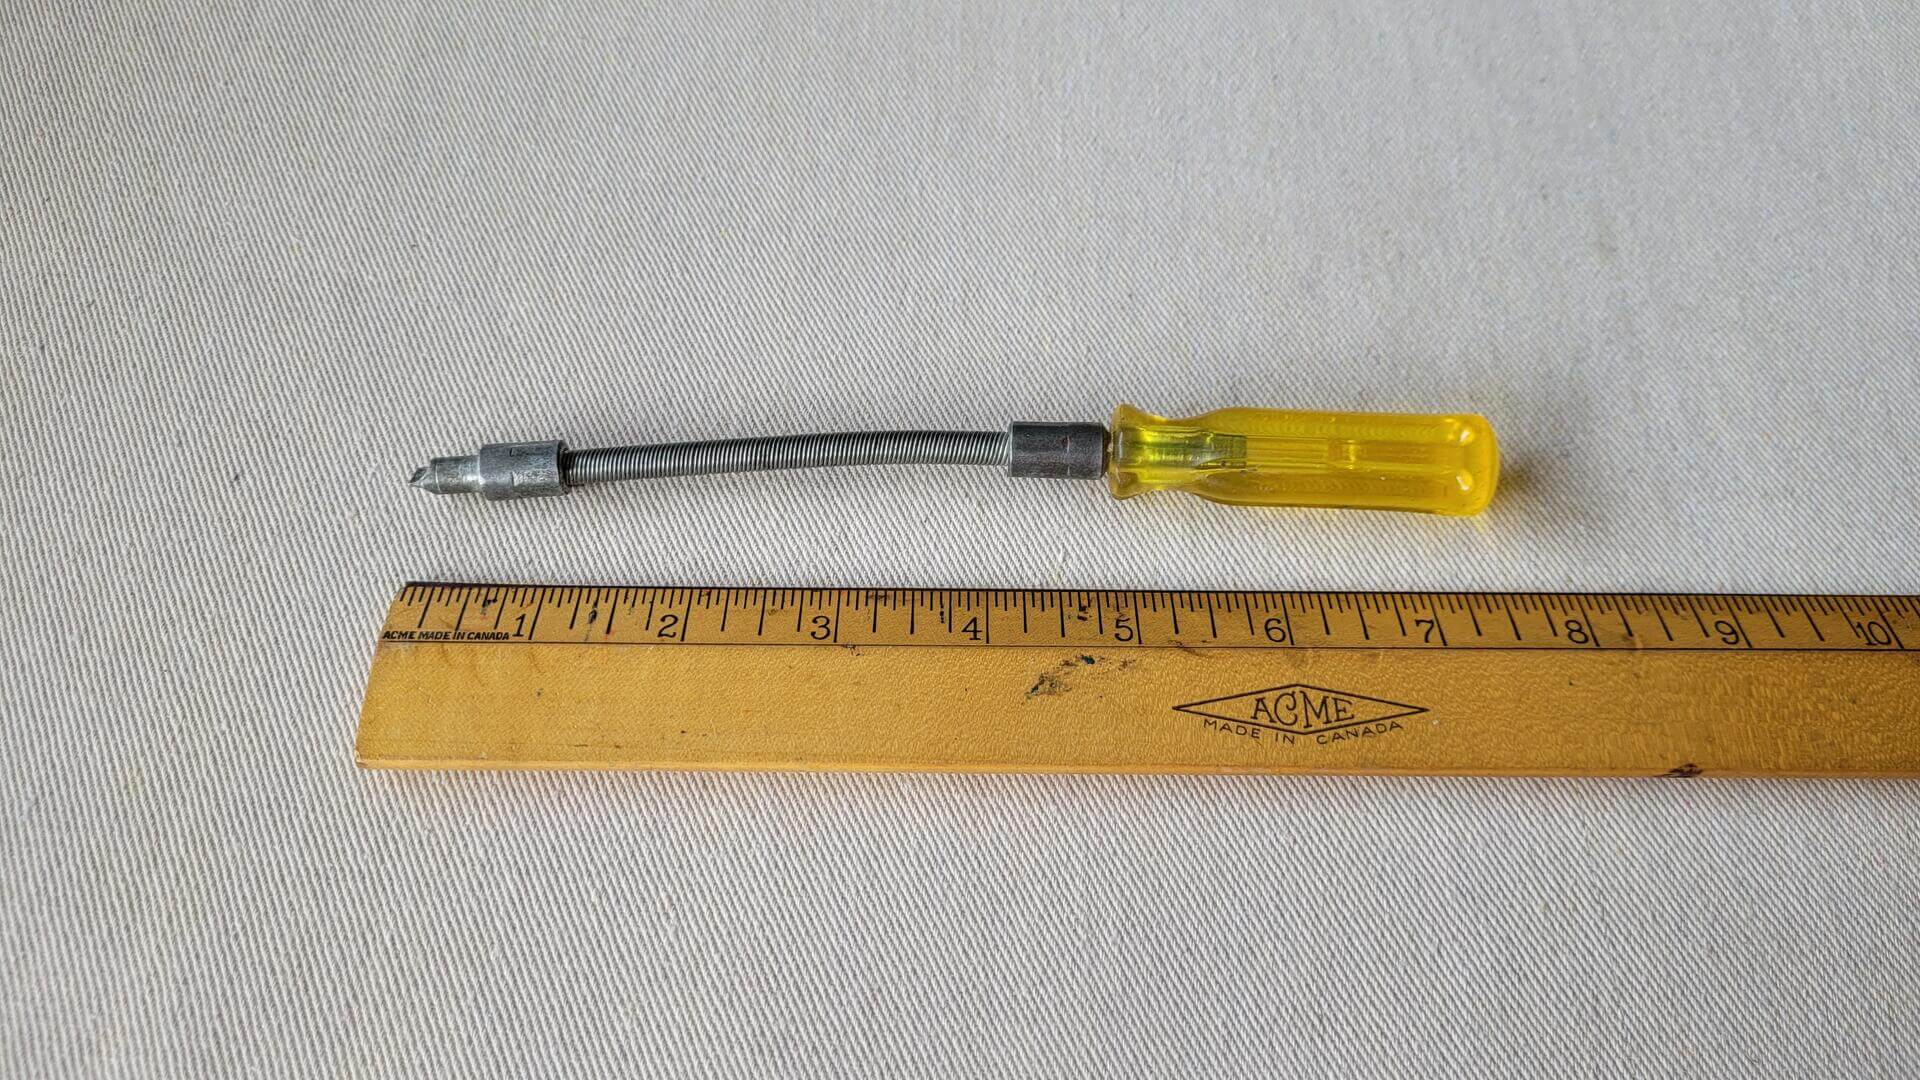 Nice retro flexible shaft slotted / flathead screwdriver 7 1/2 inches long. Vintage made in USA collectible mechanic and automotive hand tools